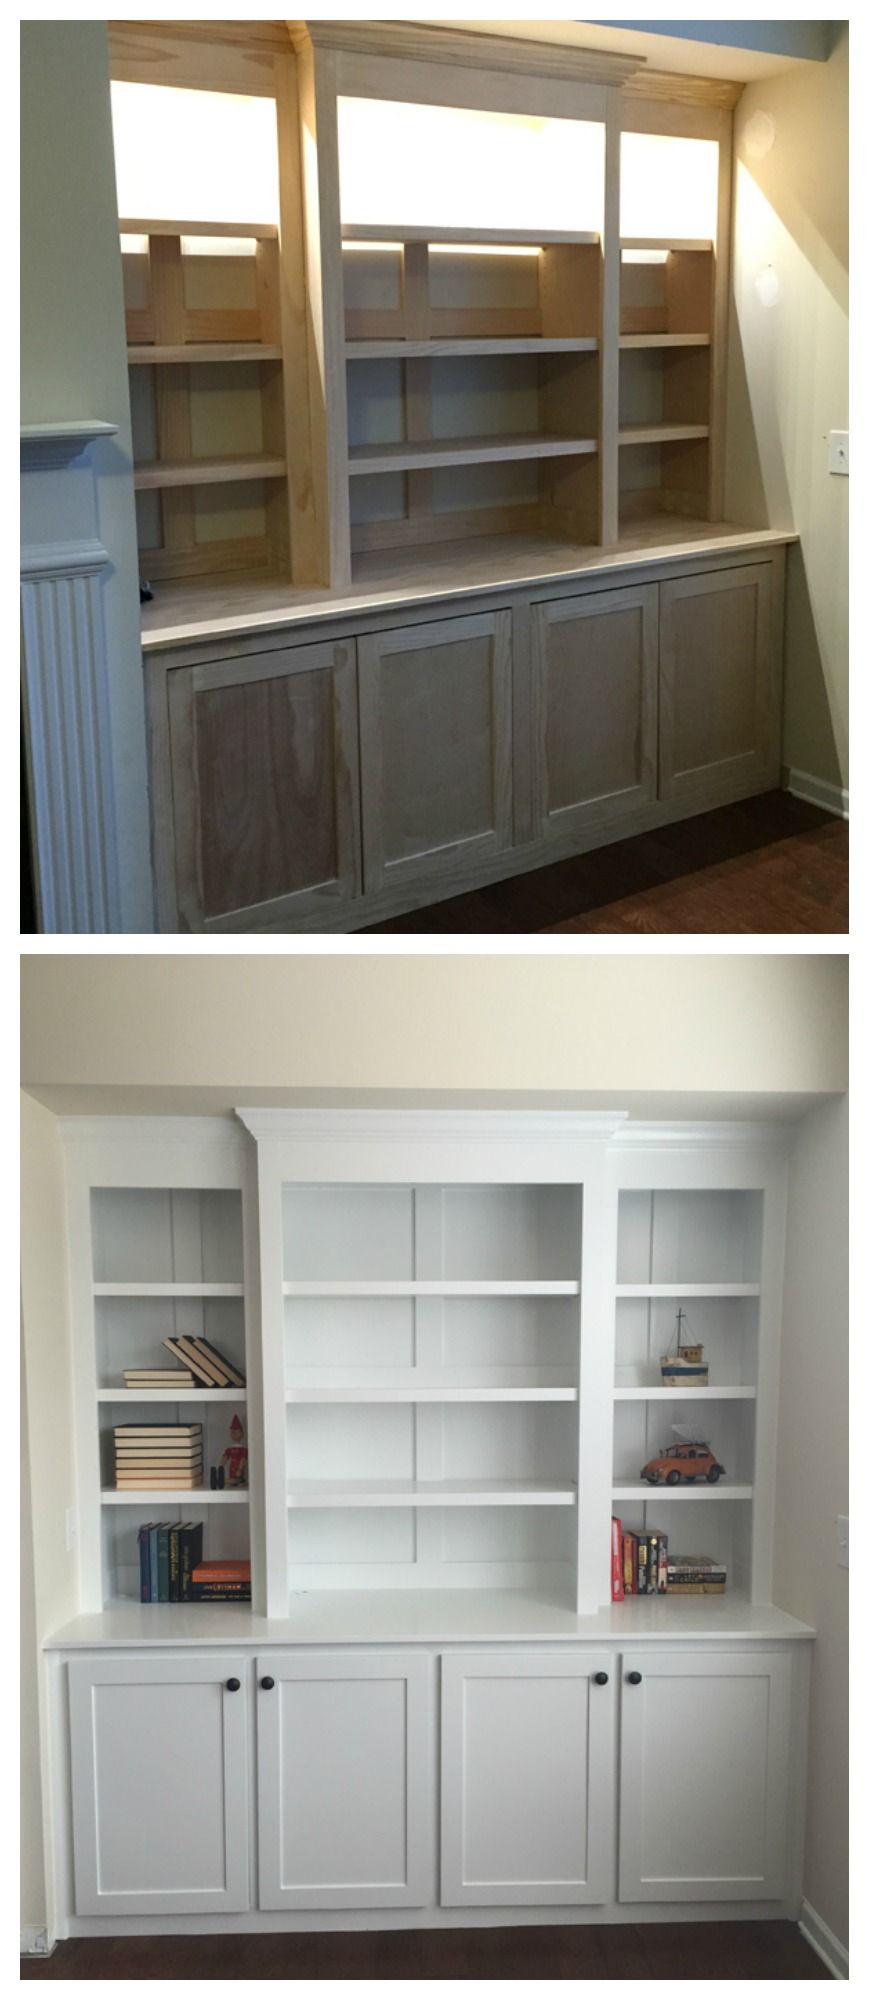 Amazing Diy Built In Buffet Shelving From Plywood And Pine intended for sizing 869 X 2000